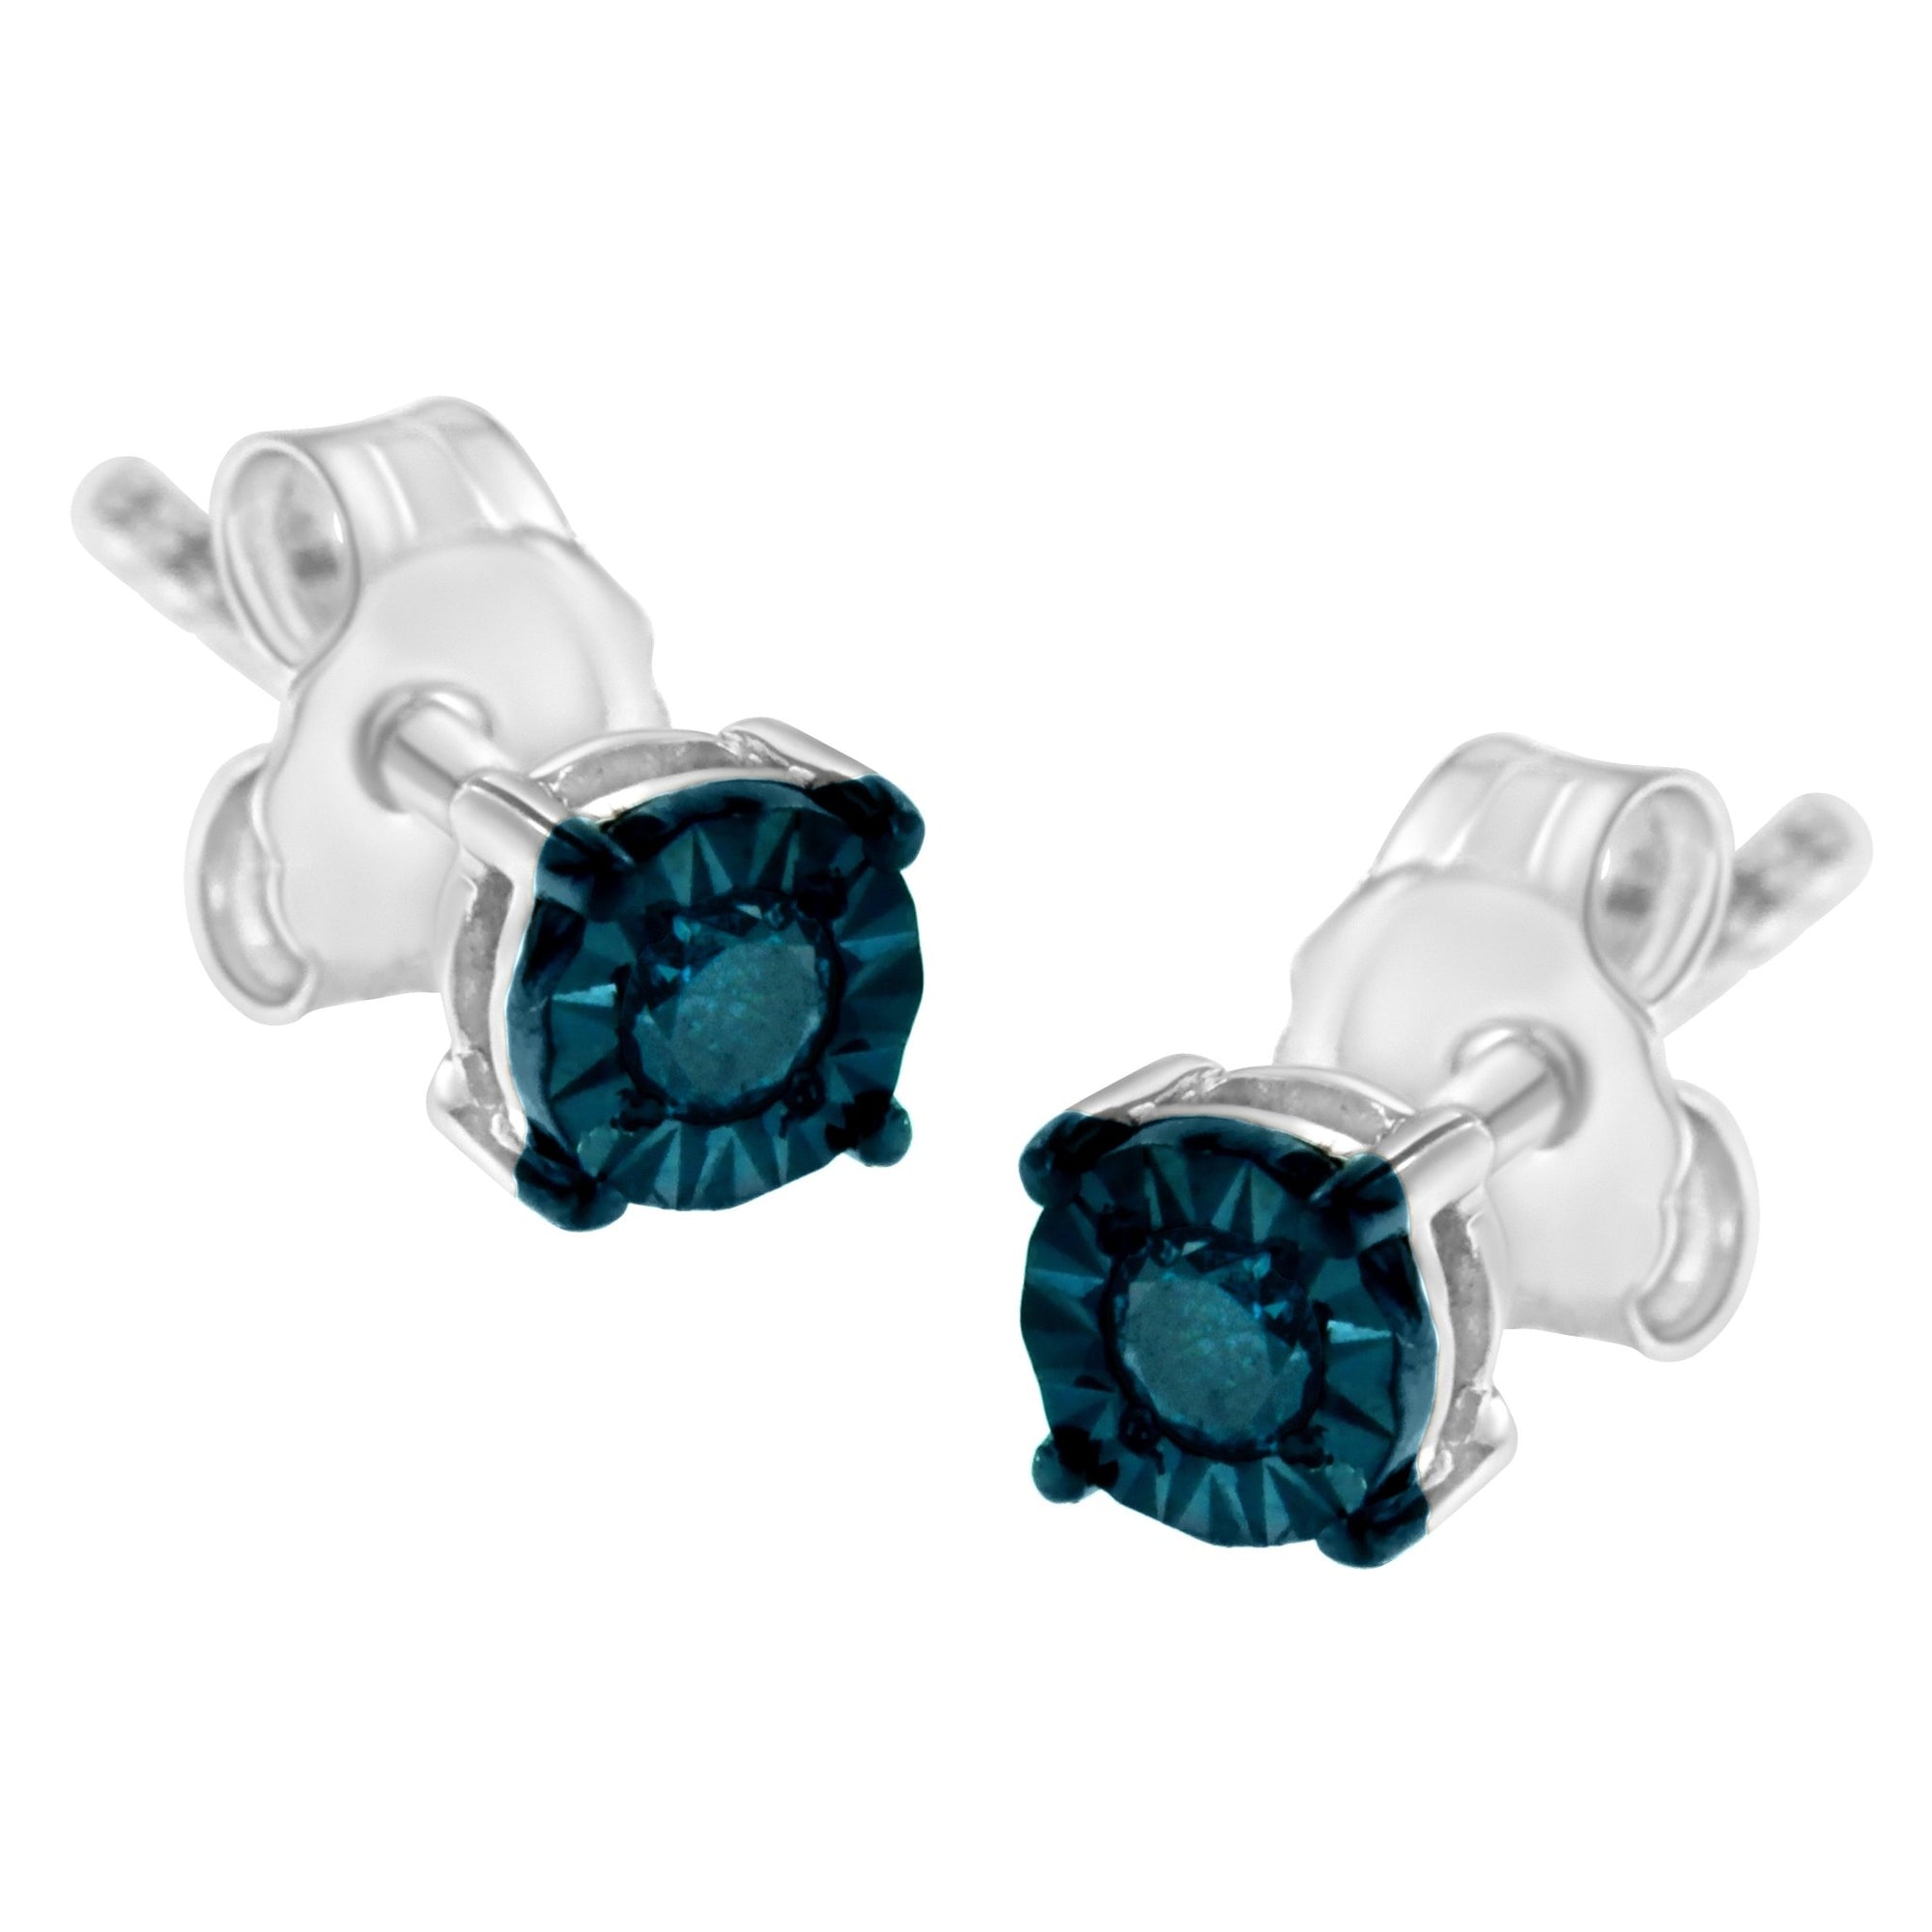 .925 Sterling Silver 1/10 Cttw Round Brilliant-Cut Blue Diamond Miracle-Set Stud Earrings (Fancy Color-Enhanced, I2-I3 Clarity) - LinkagejewelrydesignLinkagejewelrydesign